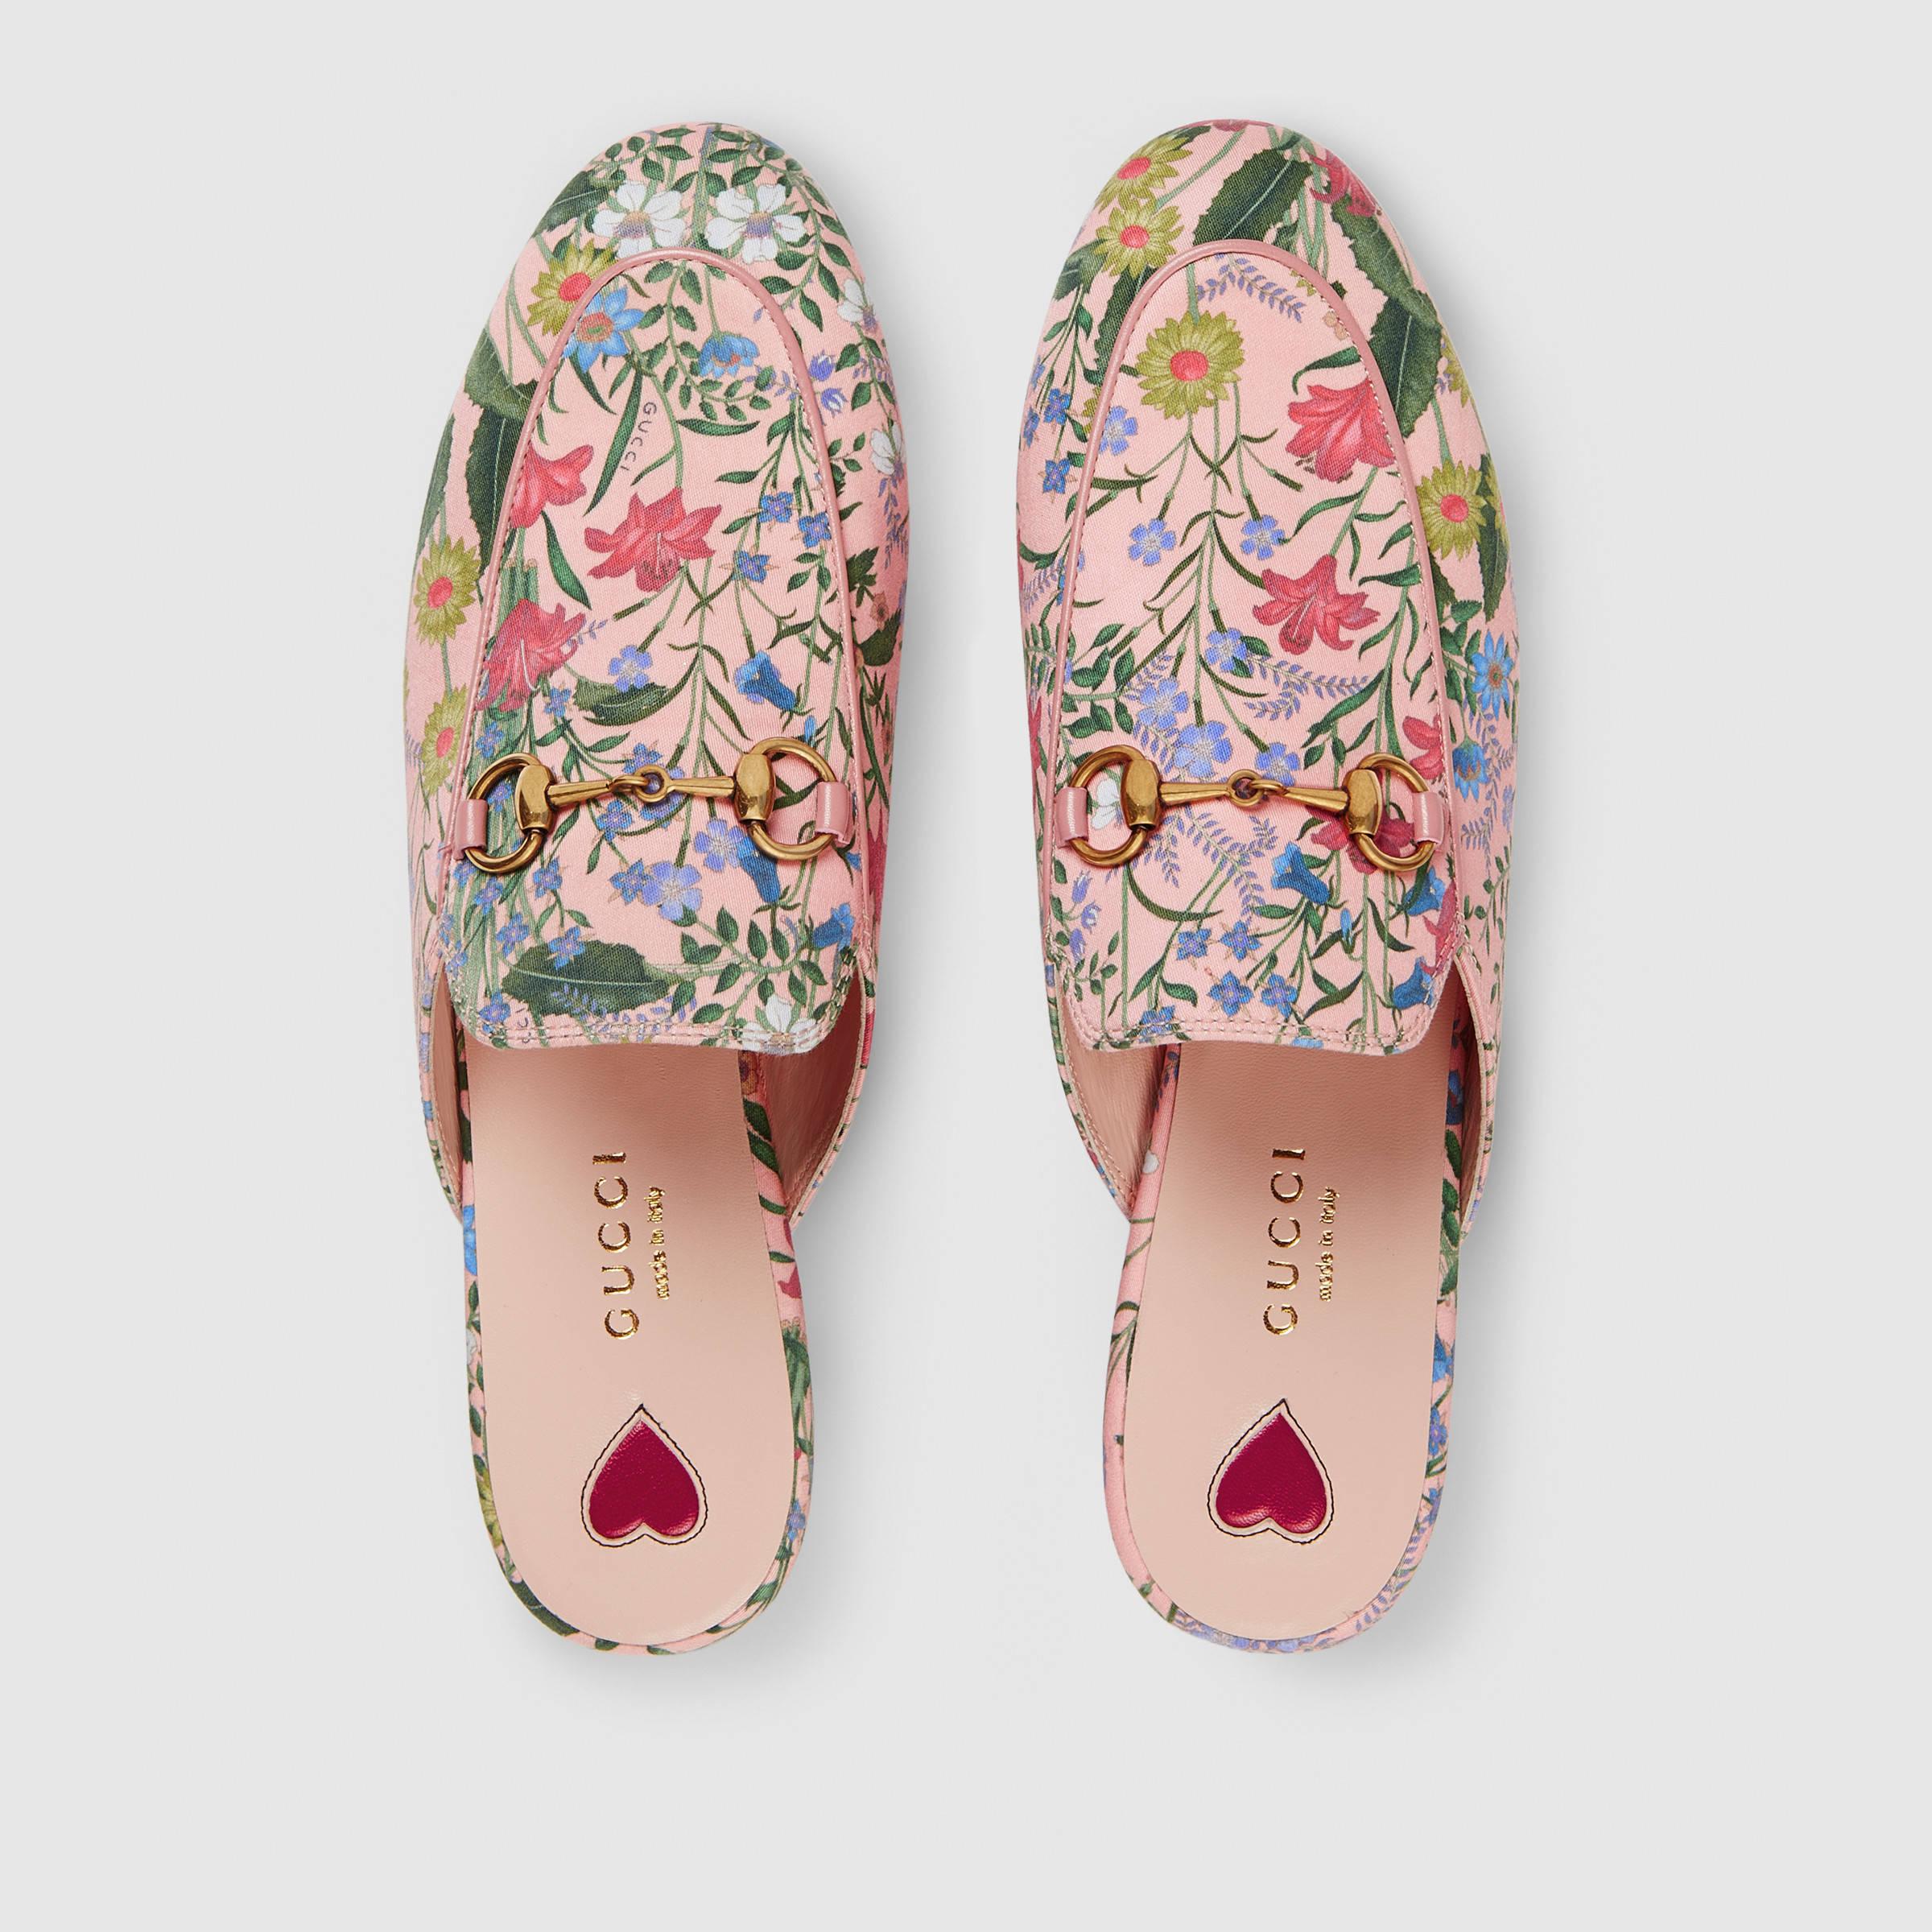 Lyst - Gucci Princetown New Flora Slipper in Pink